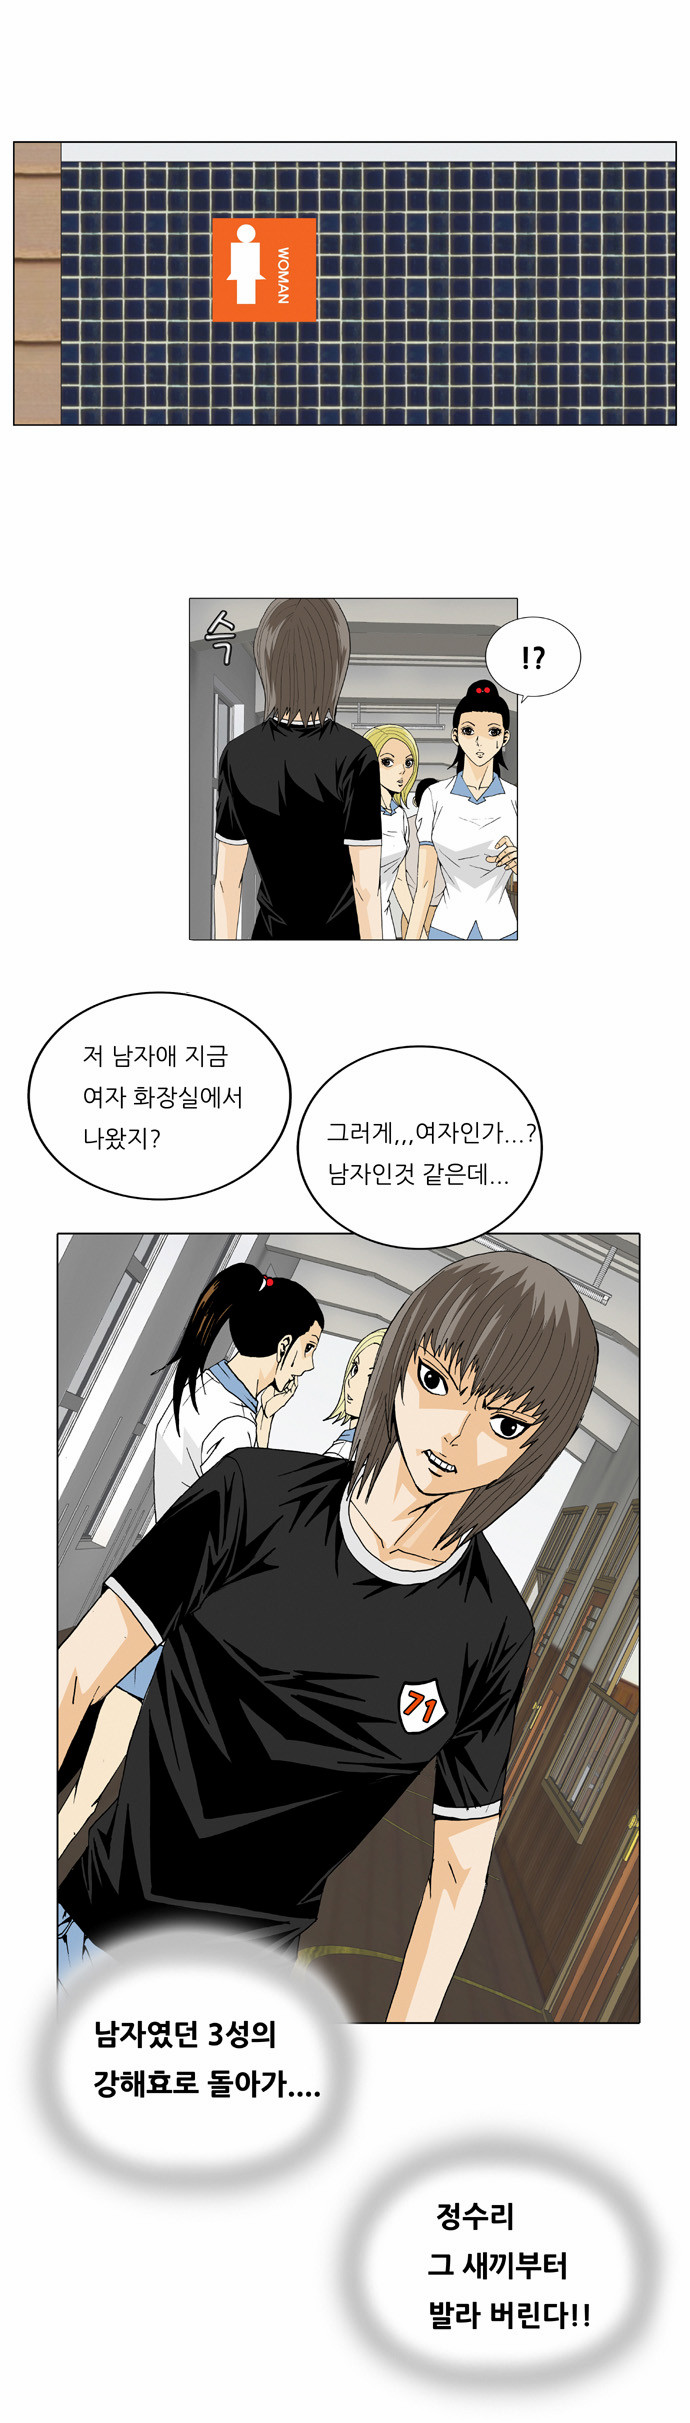 Ultimate Legend - Kang Hae Hyo - Chapter 28 - Page 30